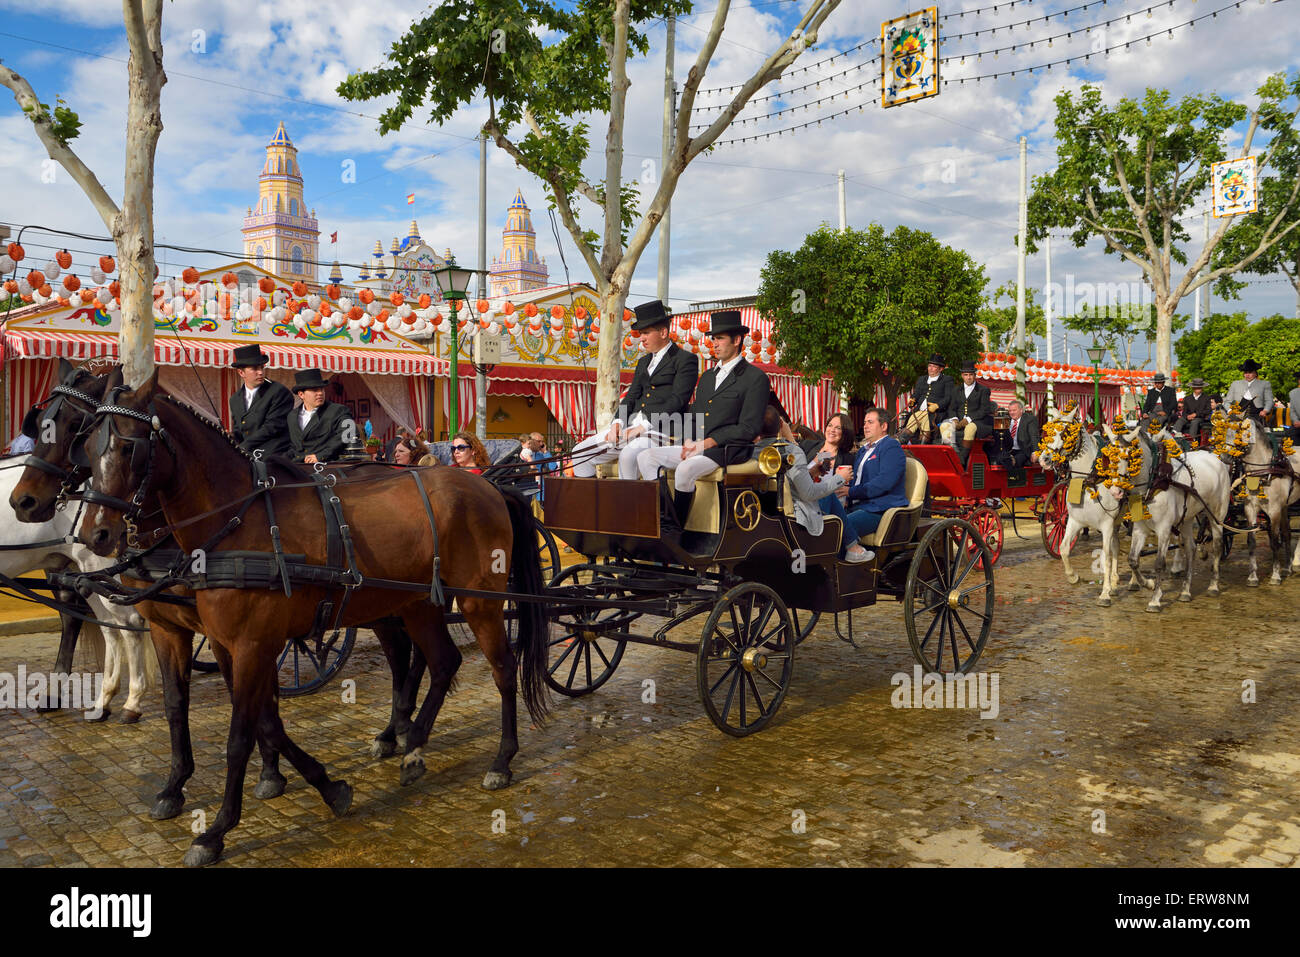 Men dressed in traje corto suits driving teams of horses pulling carriages at Seville April Fair temproary Casetas and Main Gate Stock Photo